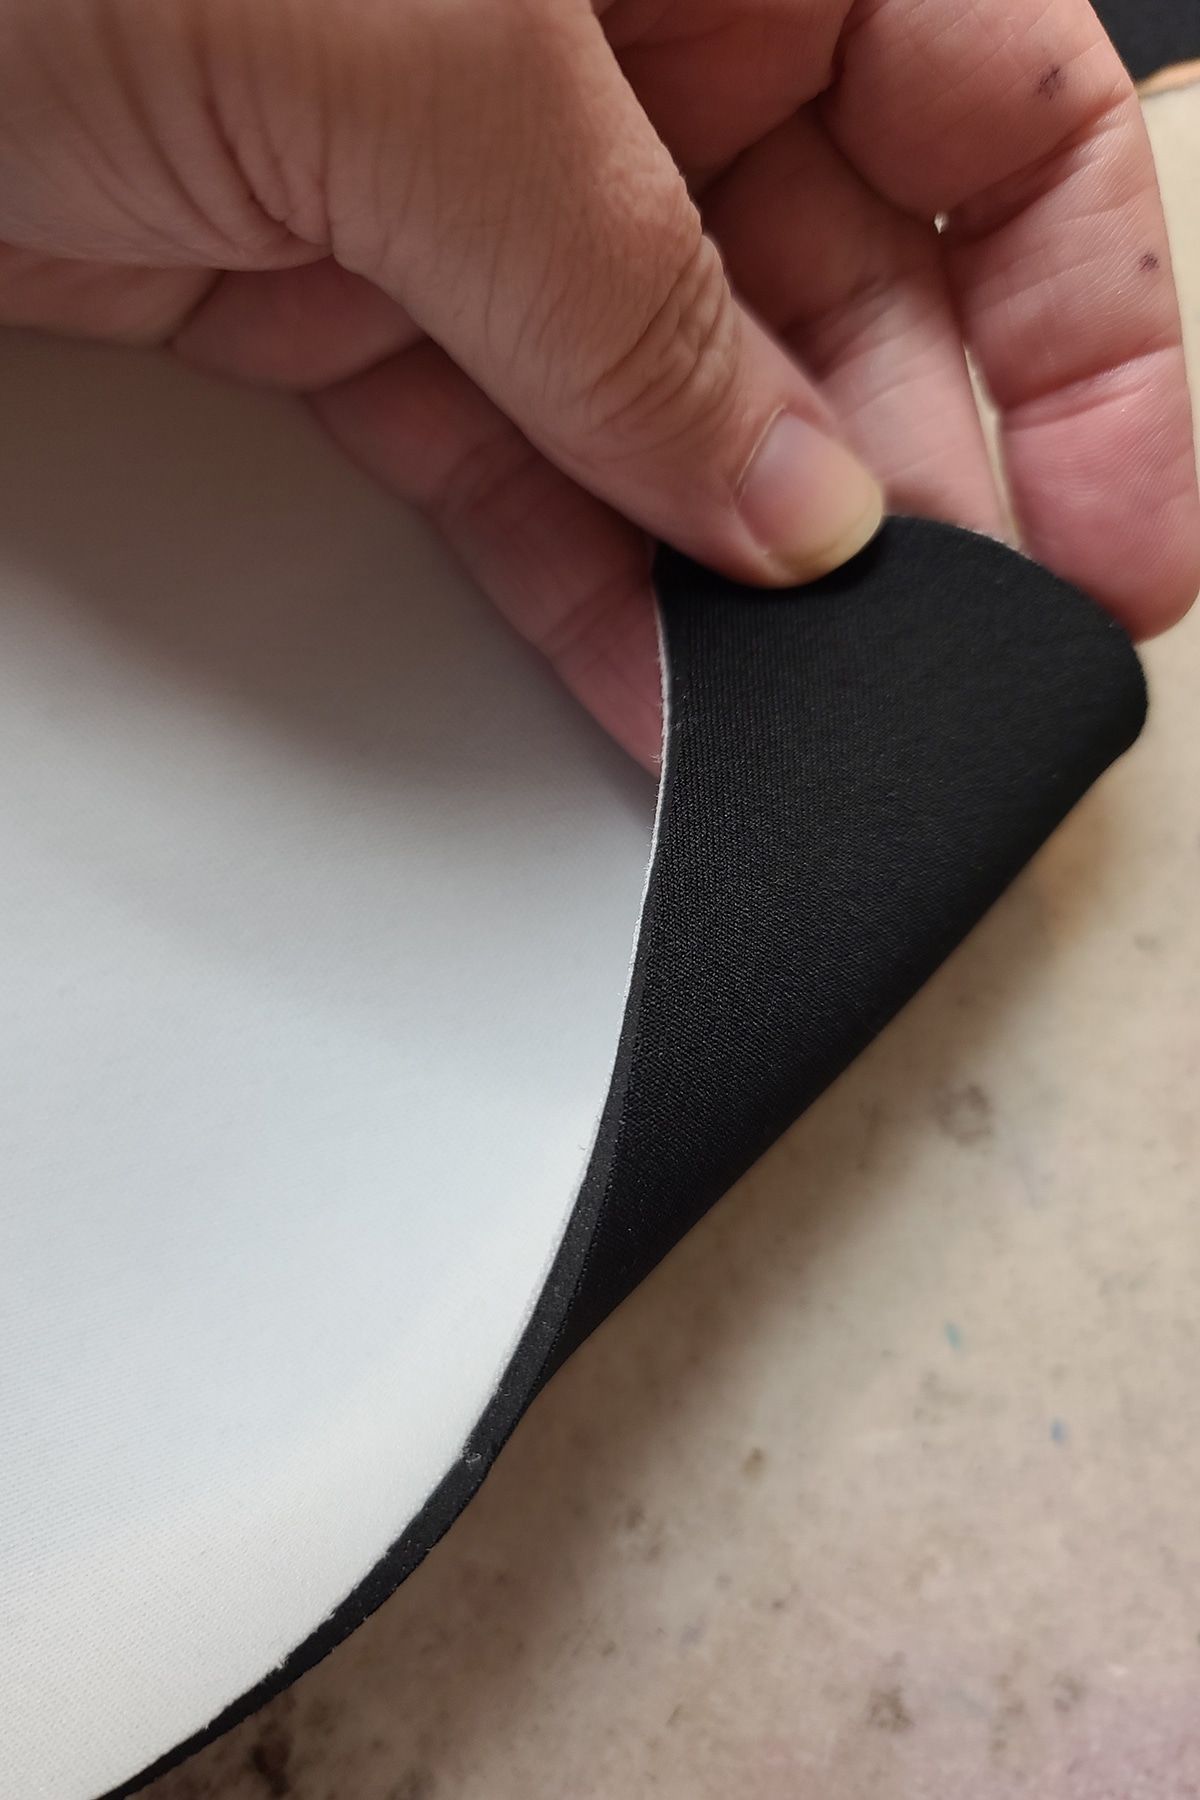 A hand lifts the corner of a piece of white bra padding, showing the underside is black.